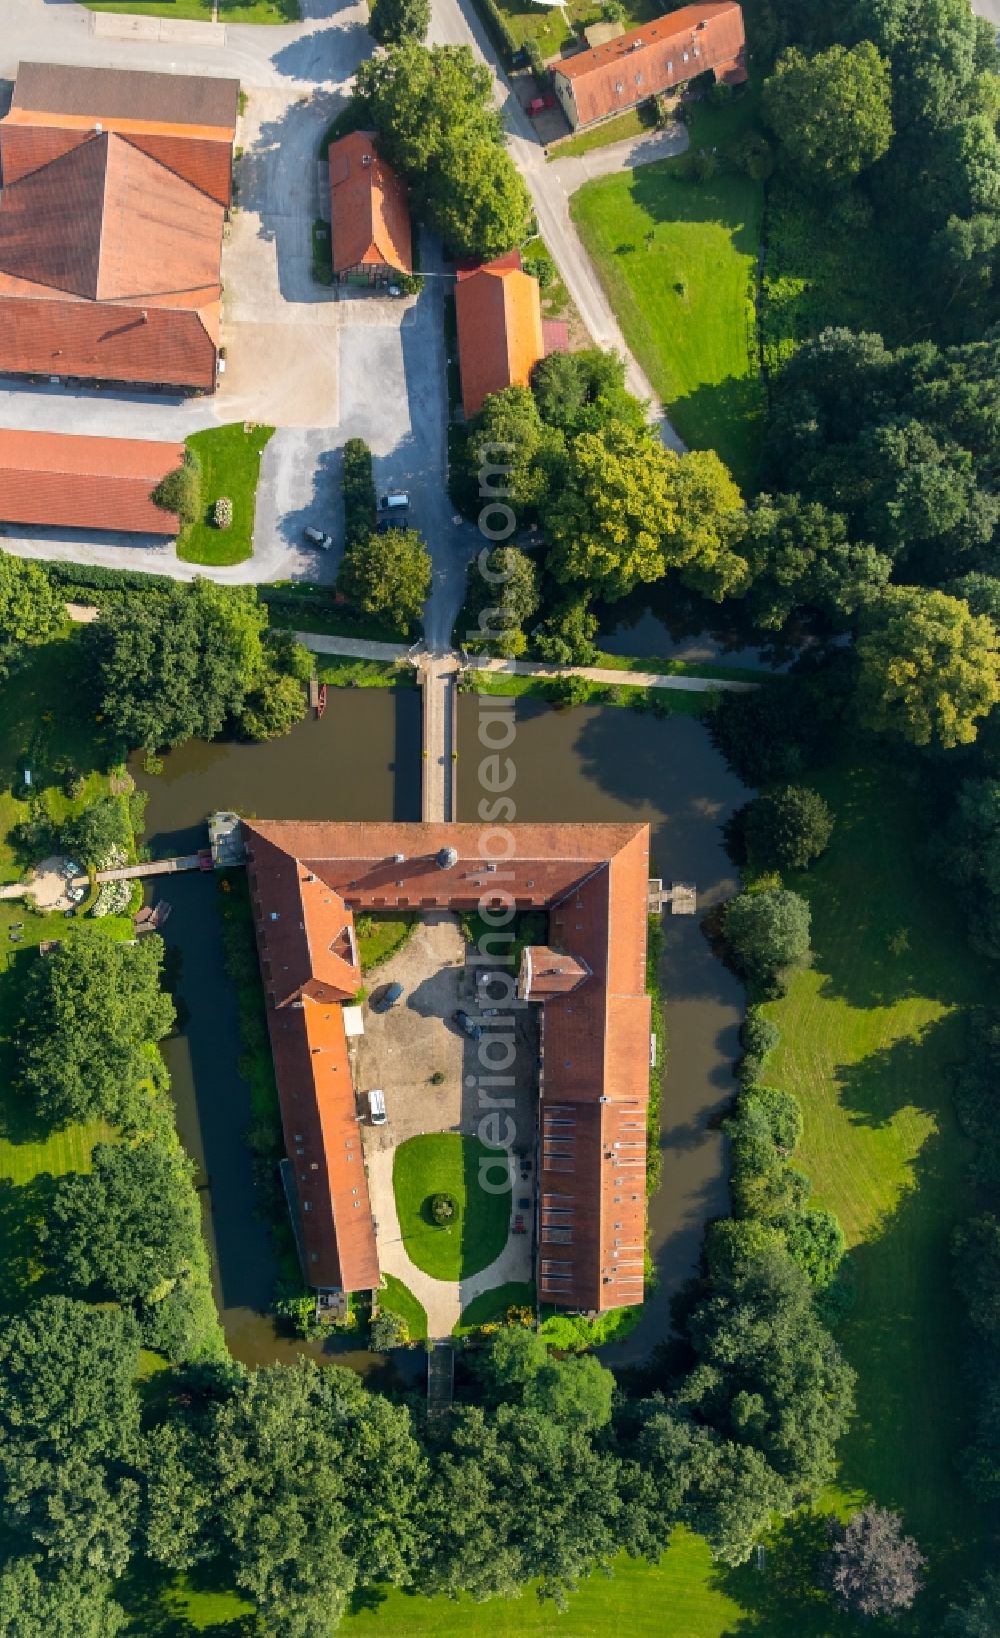 Aerial image Kirchlengern - Former water castle and estate Oberbehme in Kirchlengern in the state of North Rhine-Westphalia. The historic compound and building complex with the courtyard and yellow front is located in the valley of the river Werre on federal road B239